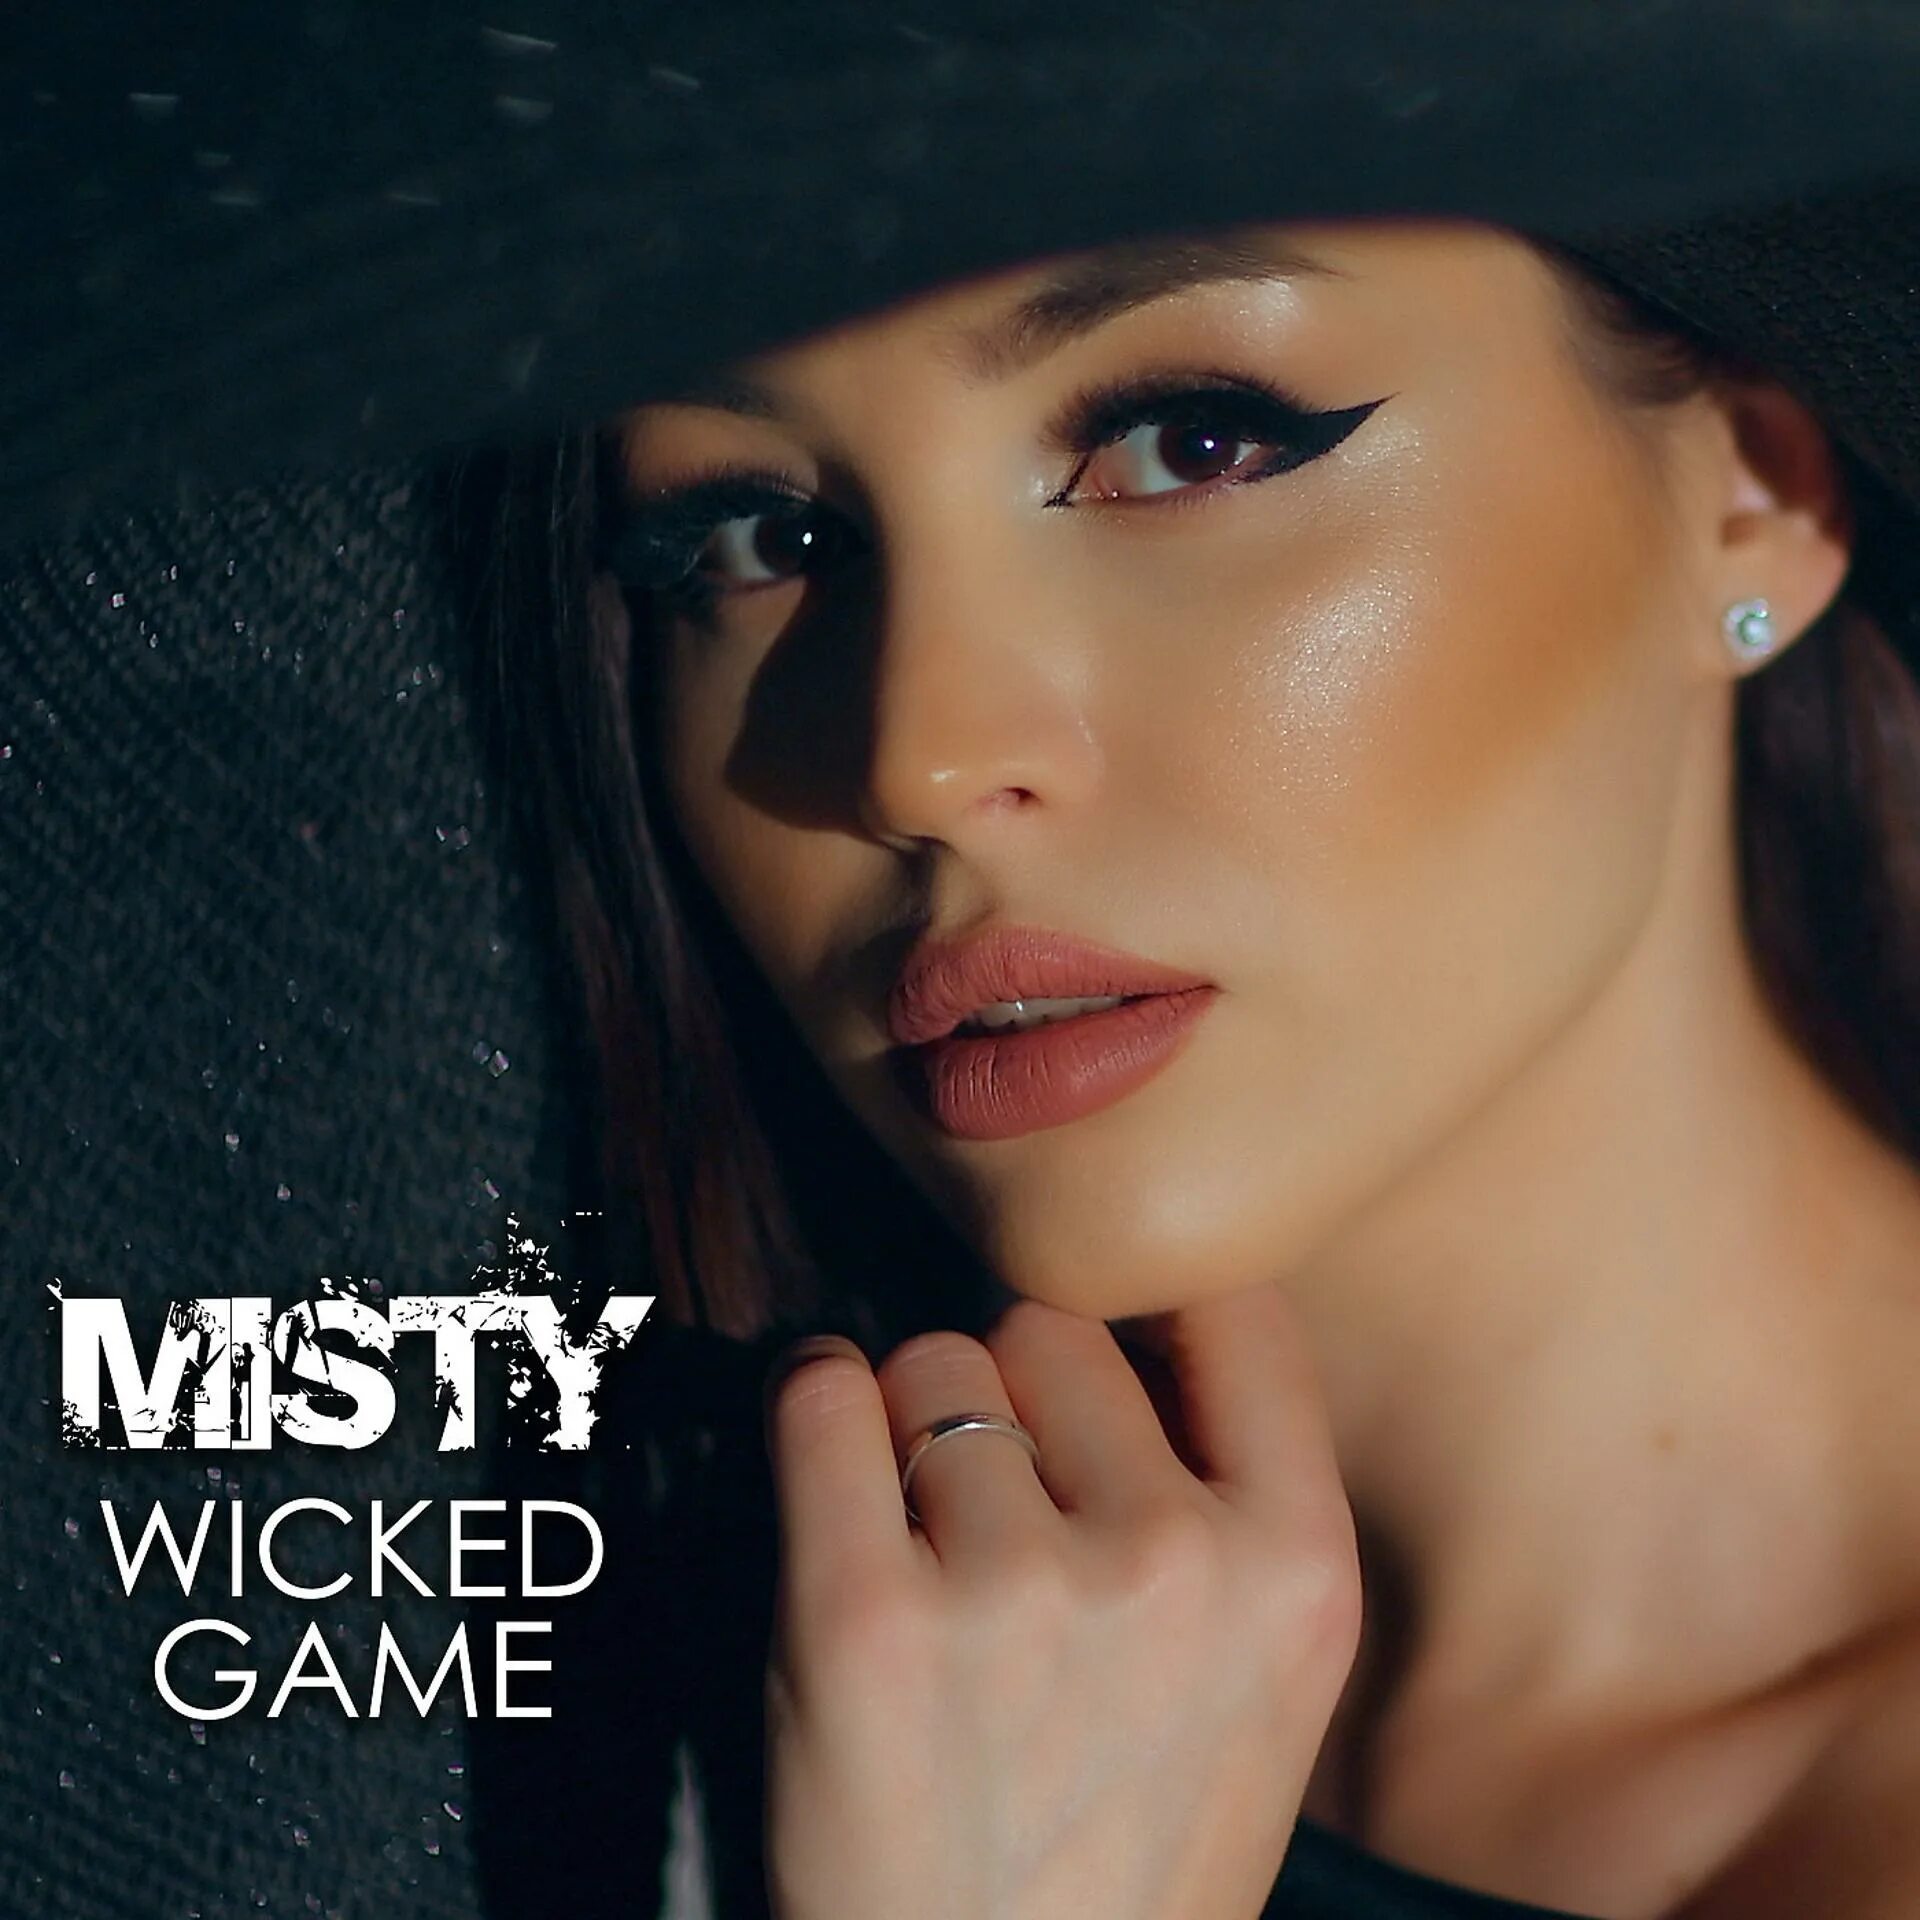 Wicked game alina. Wicked game. Misty & Deep Orient - Wicked game (Cover). Wicked game образ.